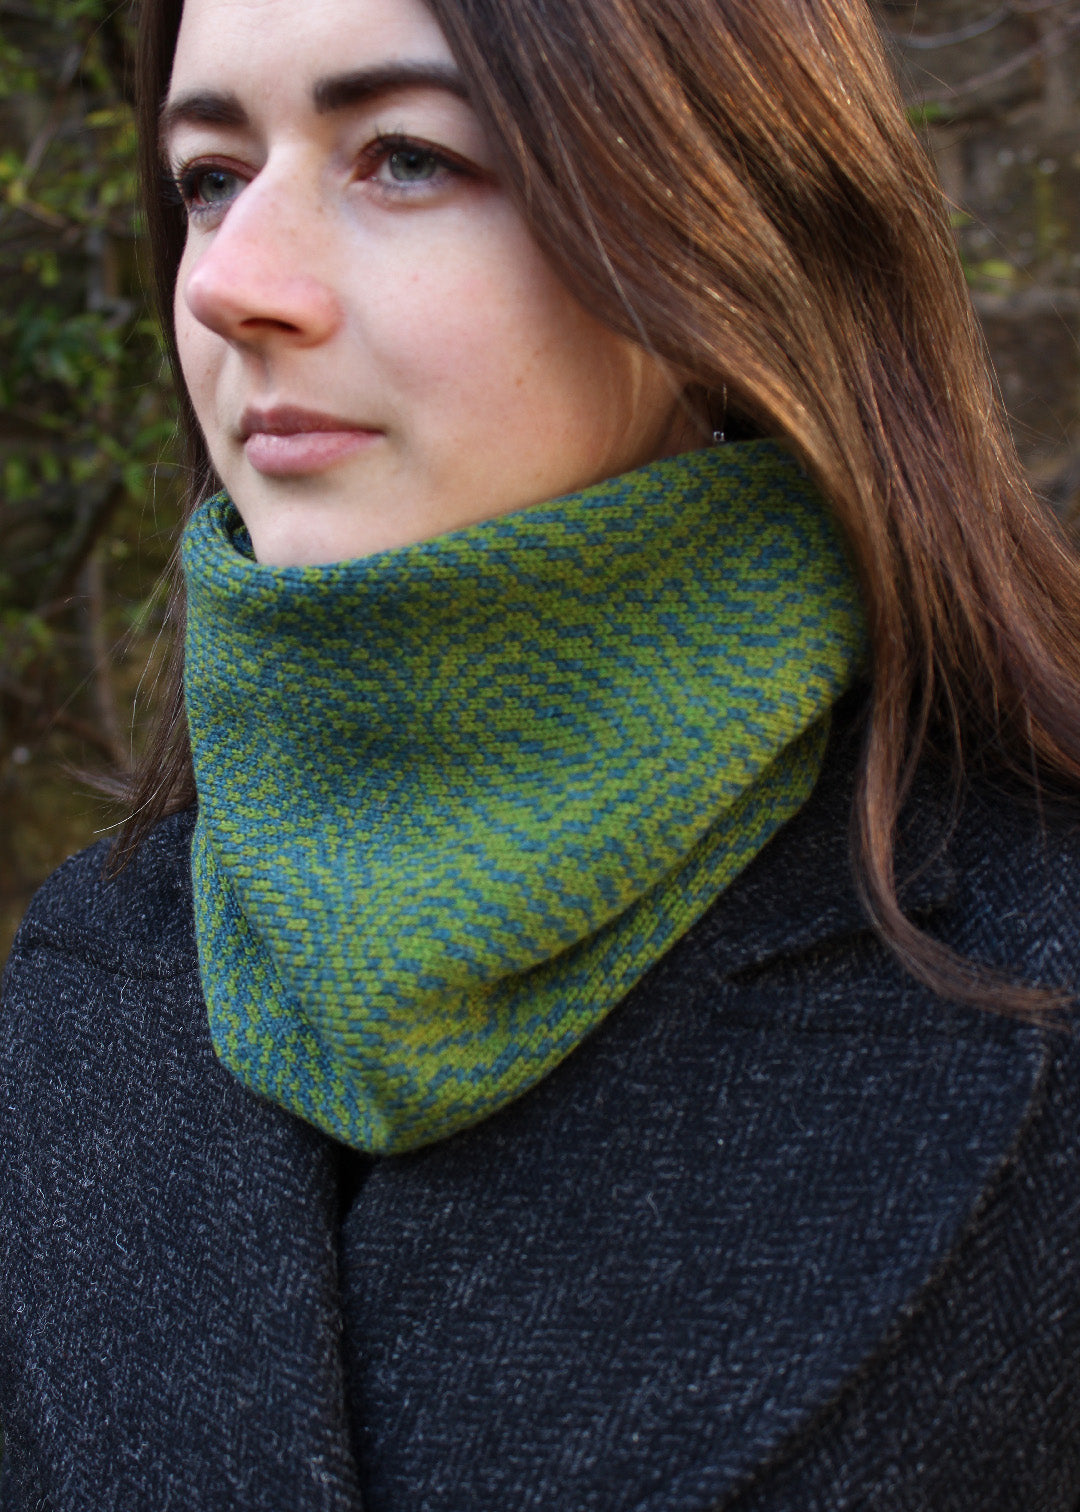 Merino lambswool neck warmer in shades of moss green with a design inspired by map contours.